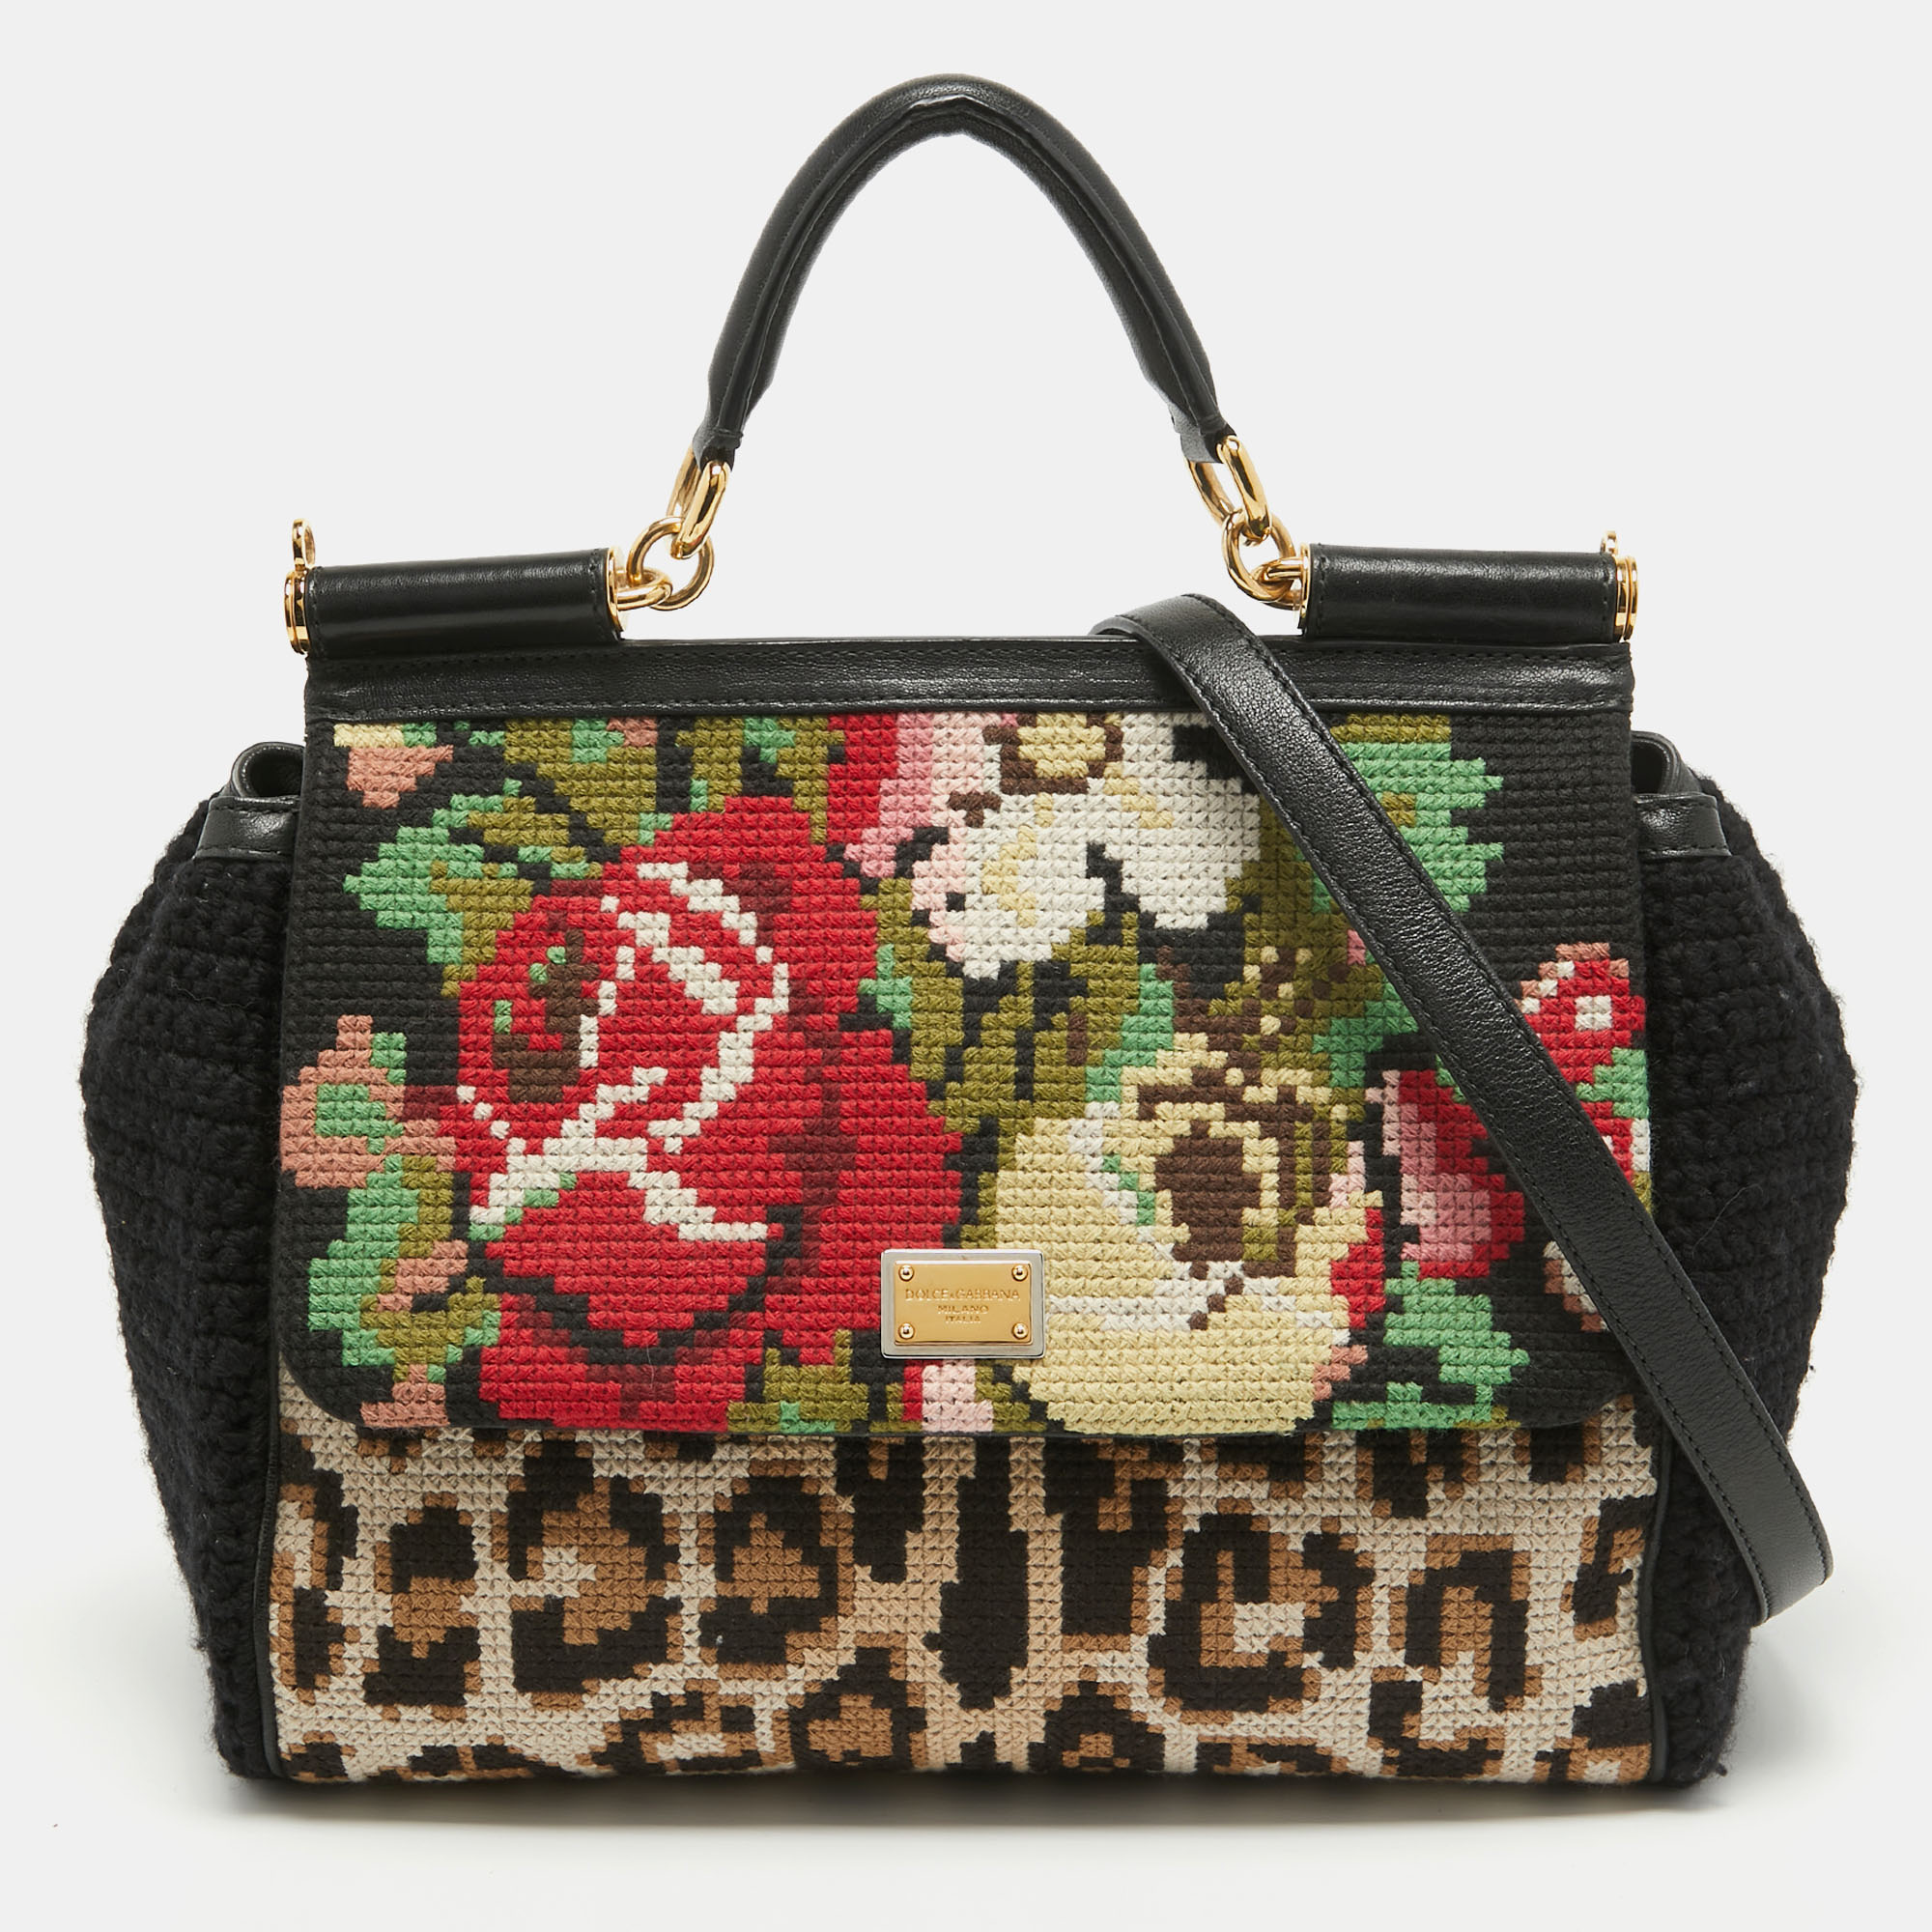 Dolce & gabbana multicolor embroidered crochet and leather large miss sicily top handle bag